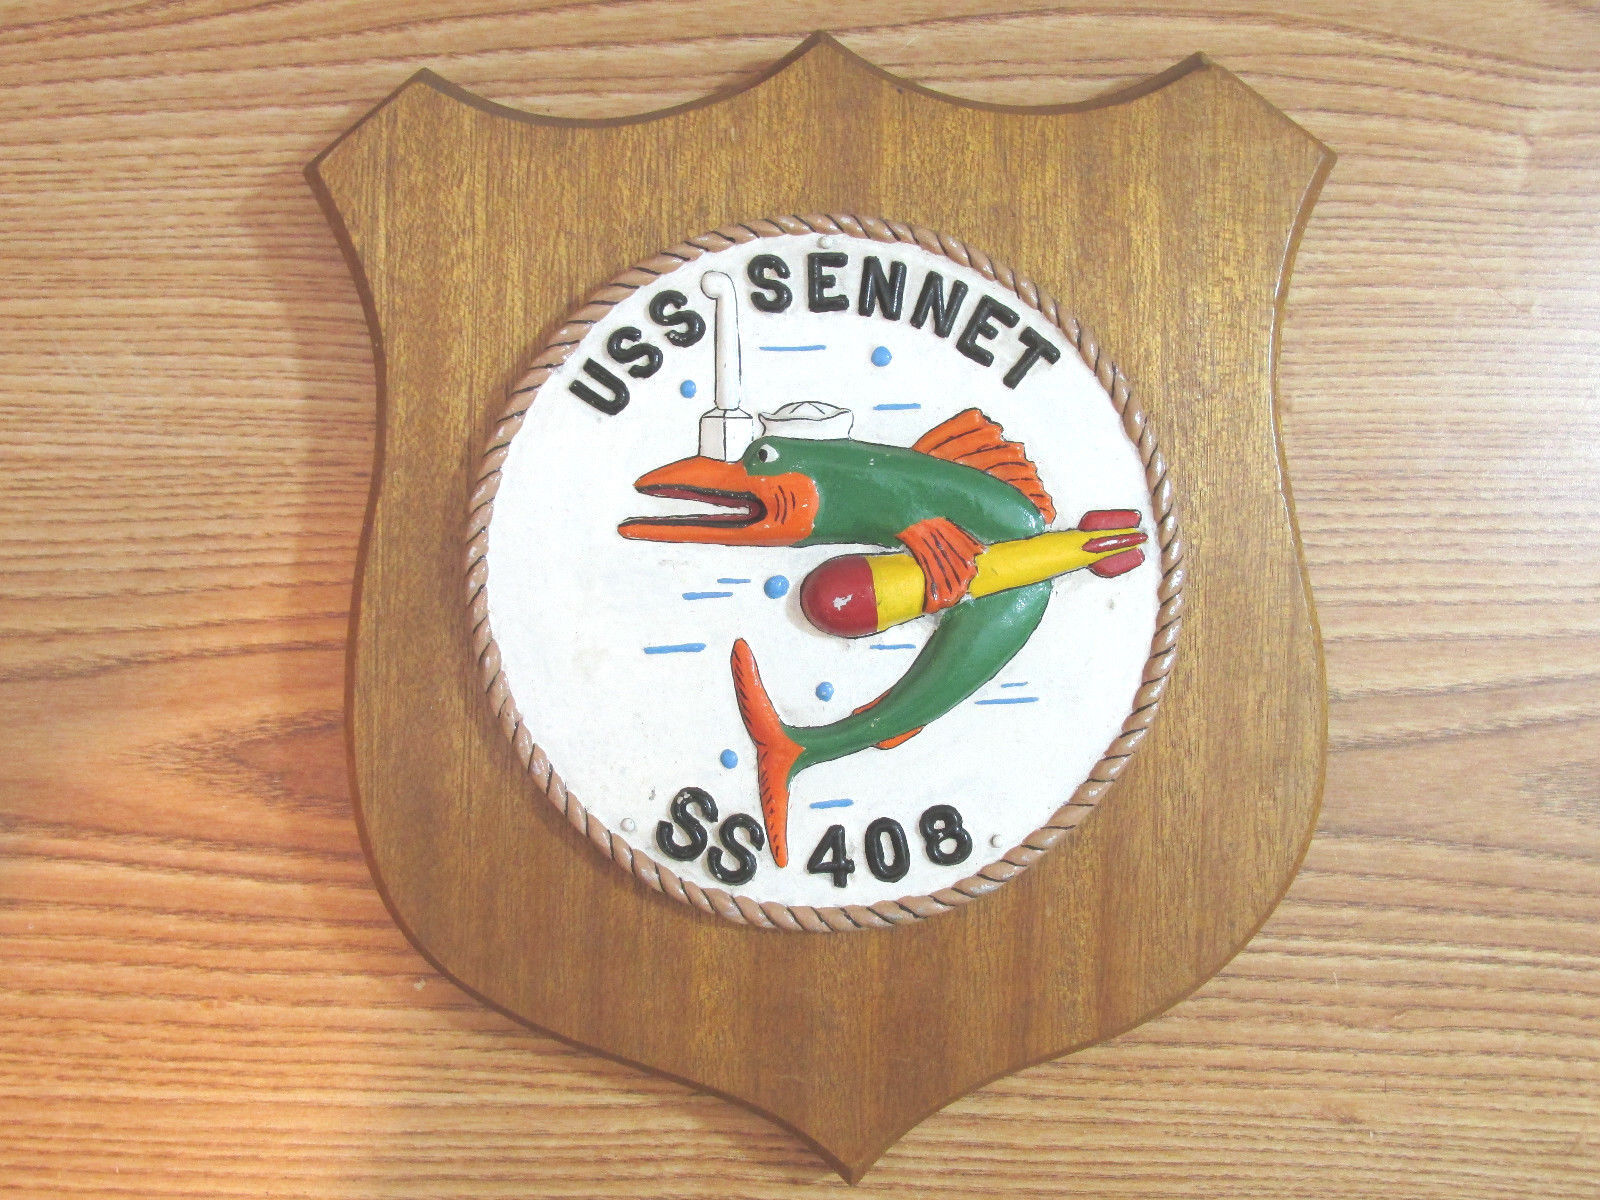 USS SENNET SS 408 MILITARY PLAQUE SUBMARINER HAND PAINTED ALLOY ALUMINUM 